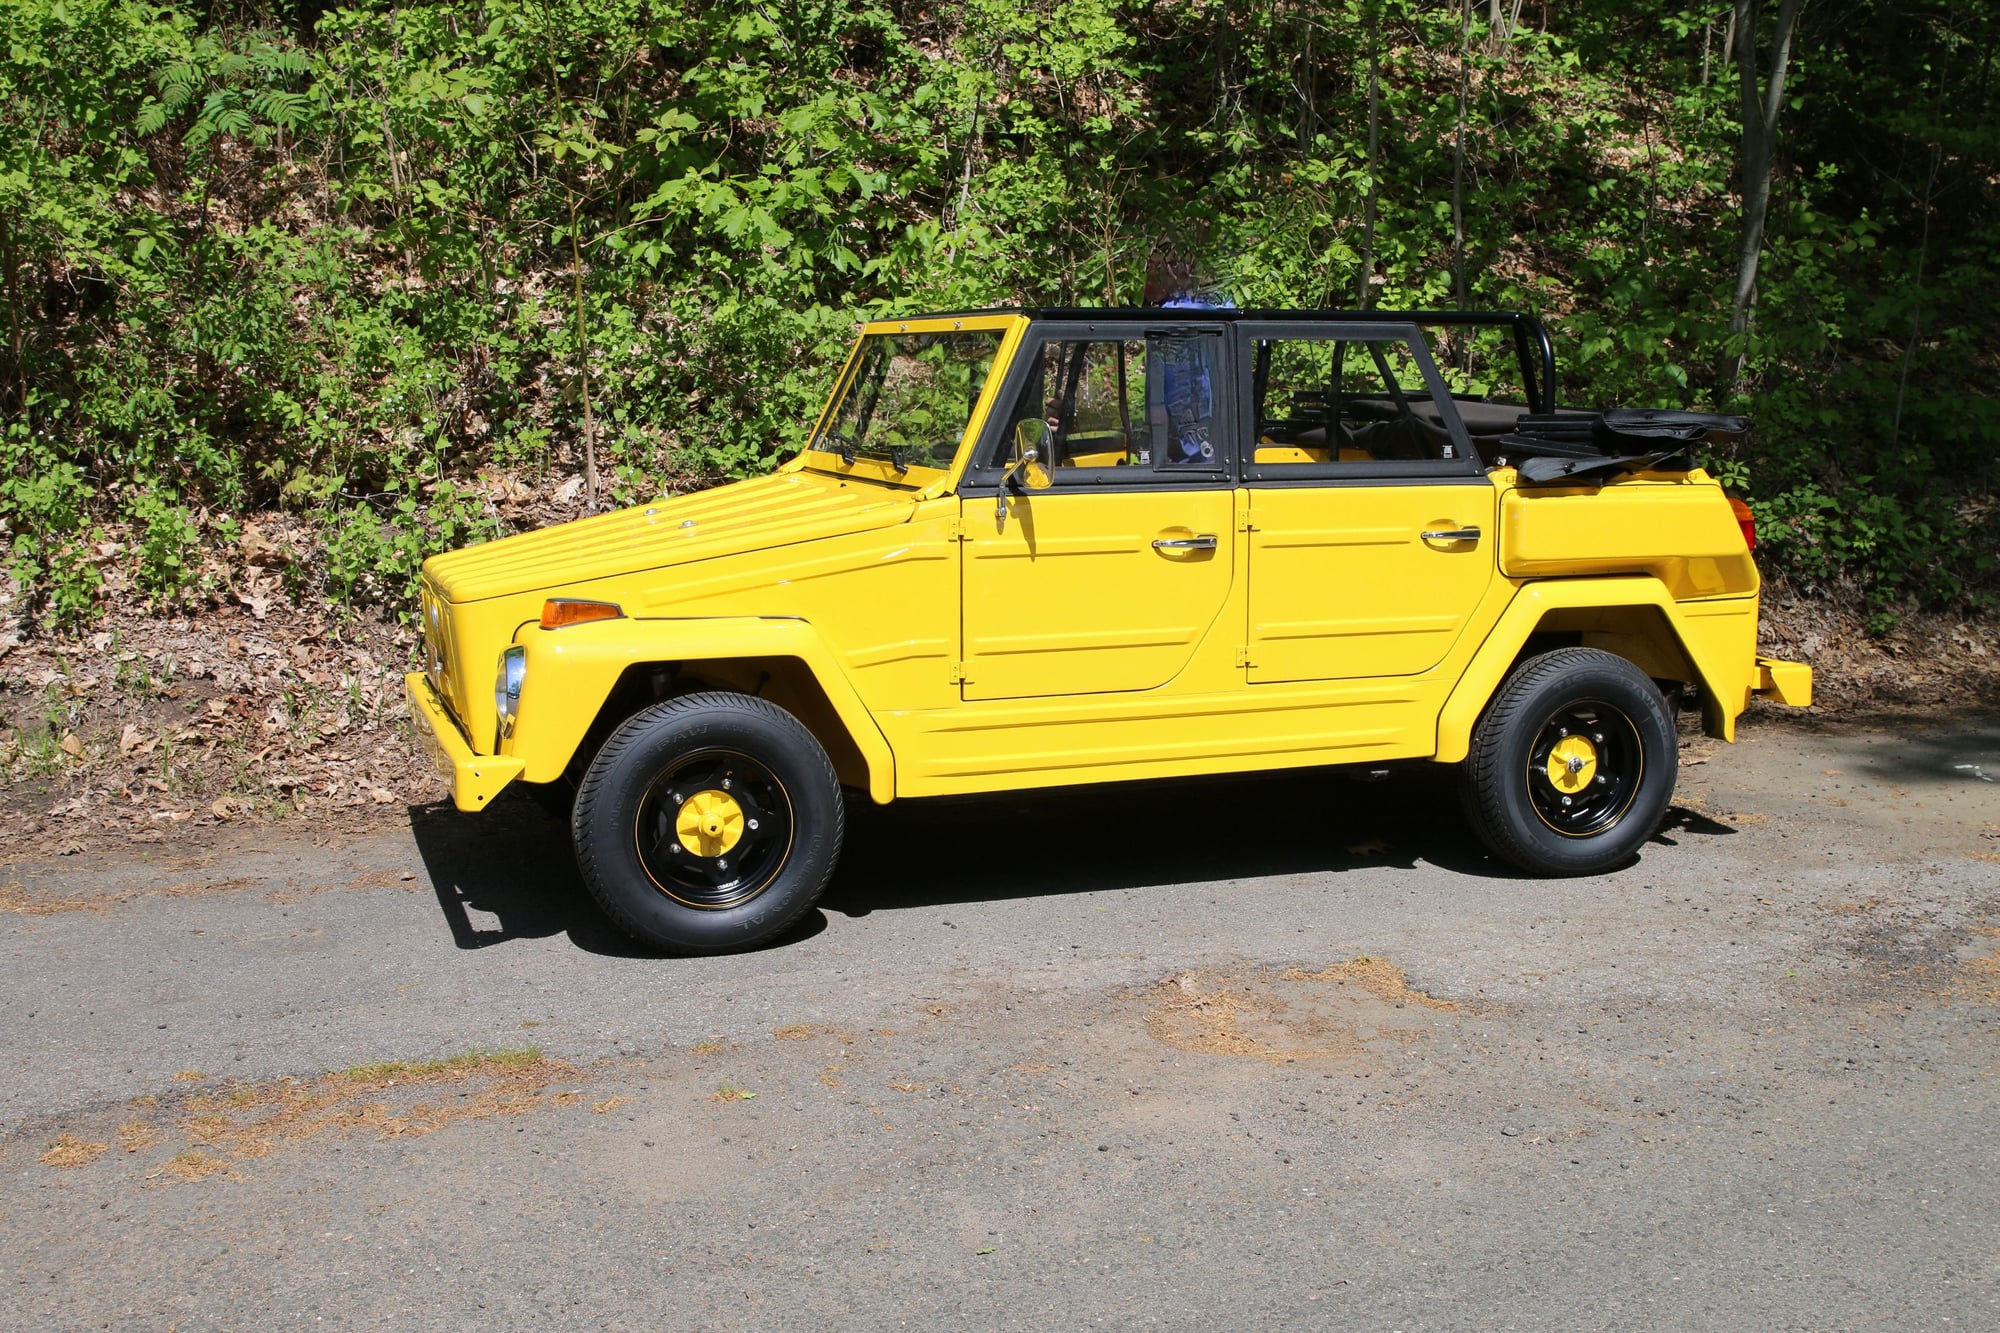 1973 Volkswagen Thing - 1973 Volkswagen Thing - Used - VIN 1832653004 - 90,450 Miles - 4 cyl - 2WD - Manual - Convertible - Yellow - Simsbury, CT 06070, United States